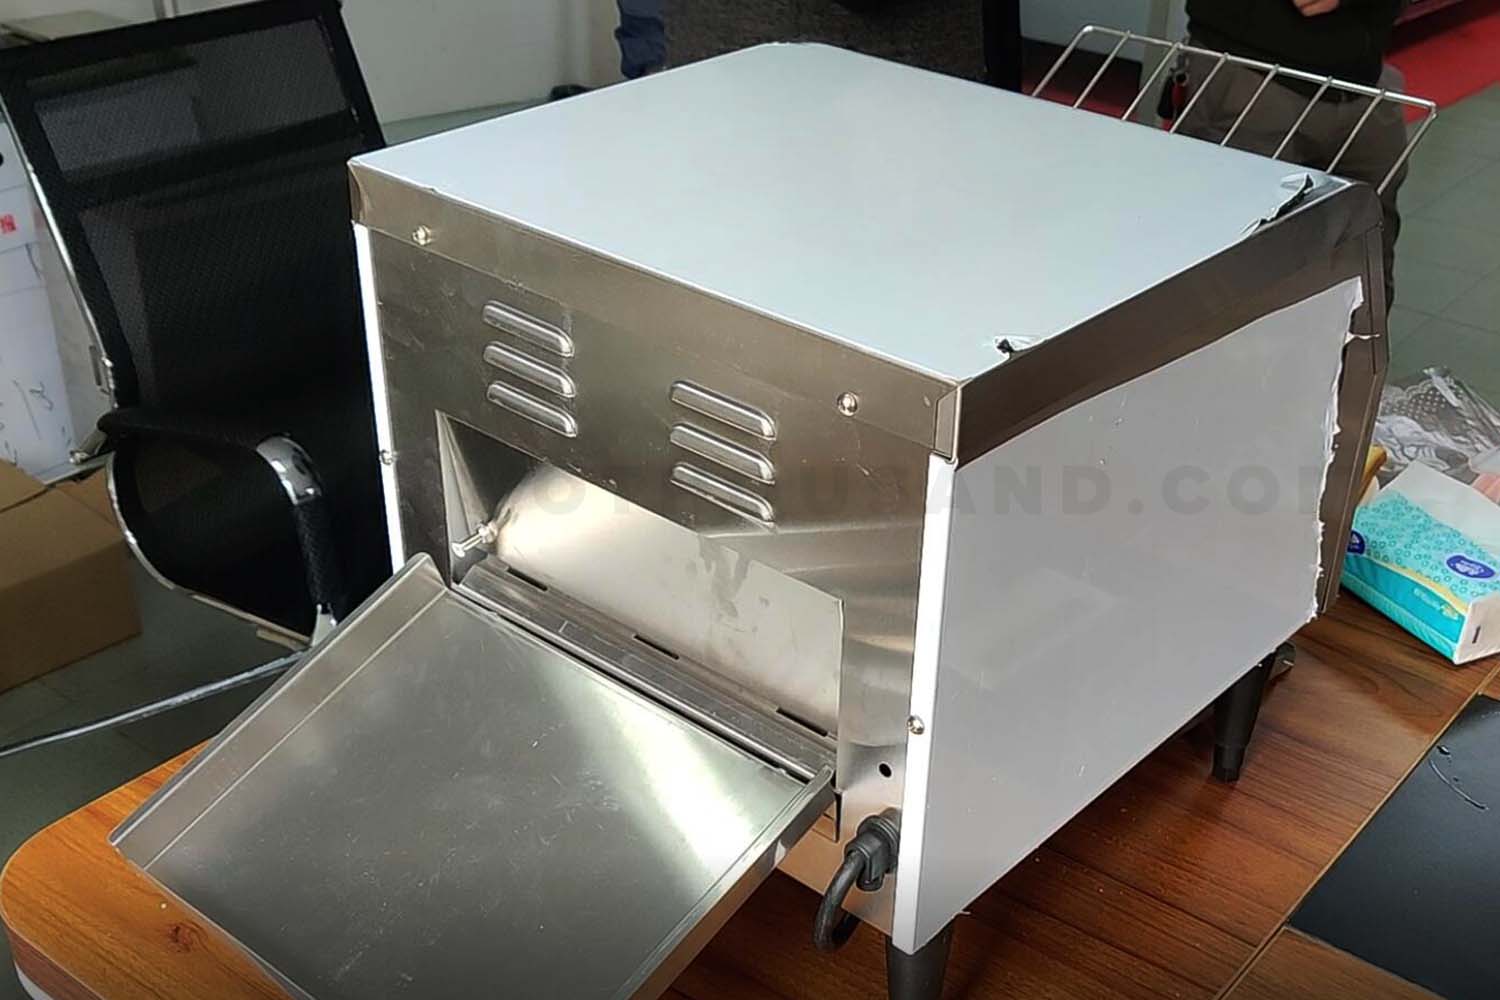 Back View of Commercial Conveyor Toaster